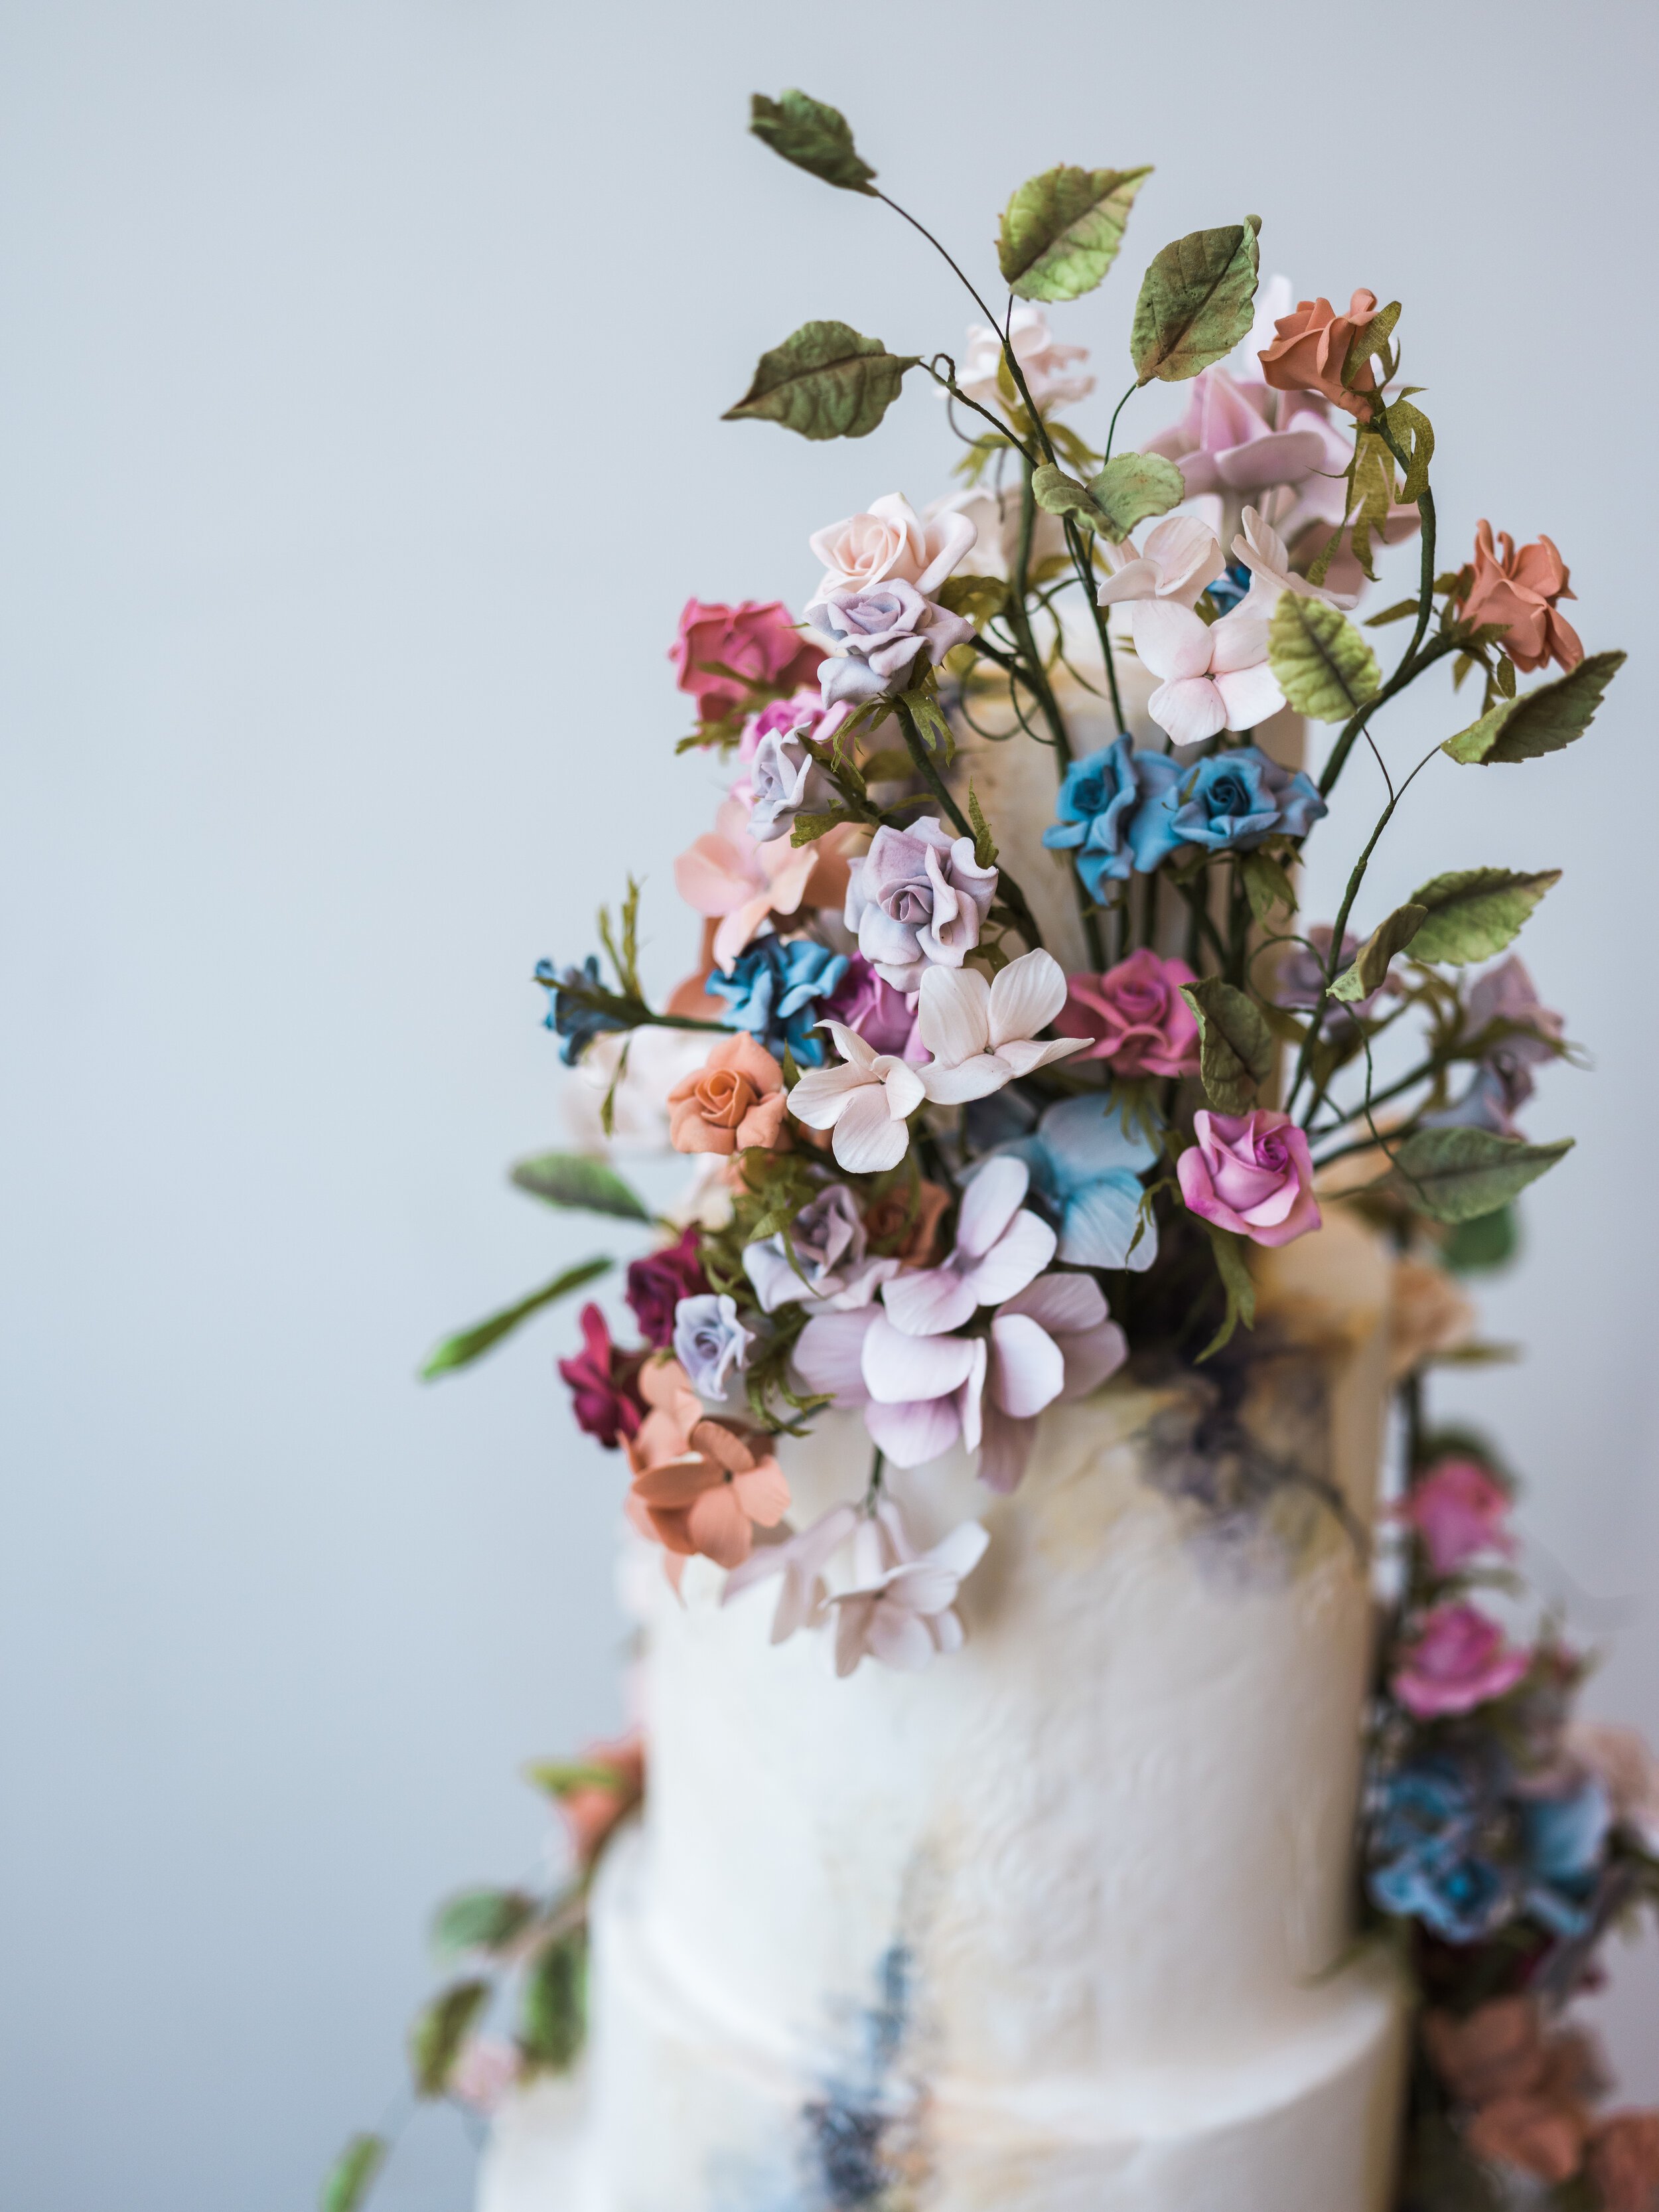 7 Safety Tips for Decorating Cakes With Flowers